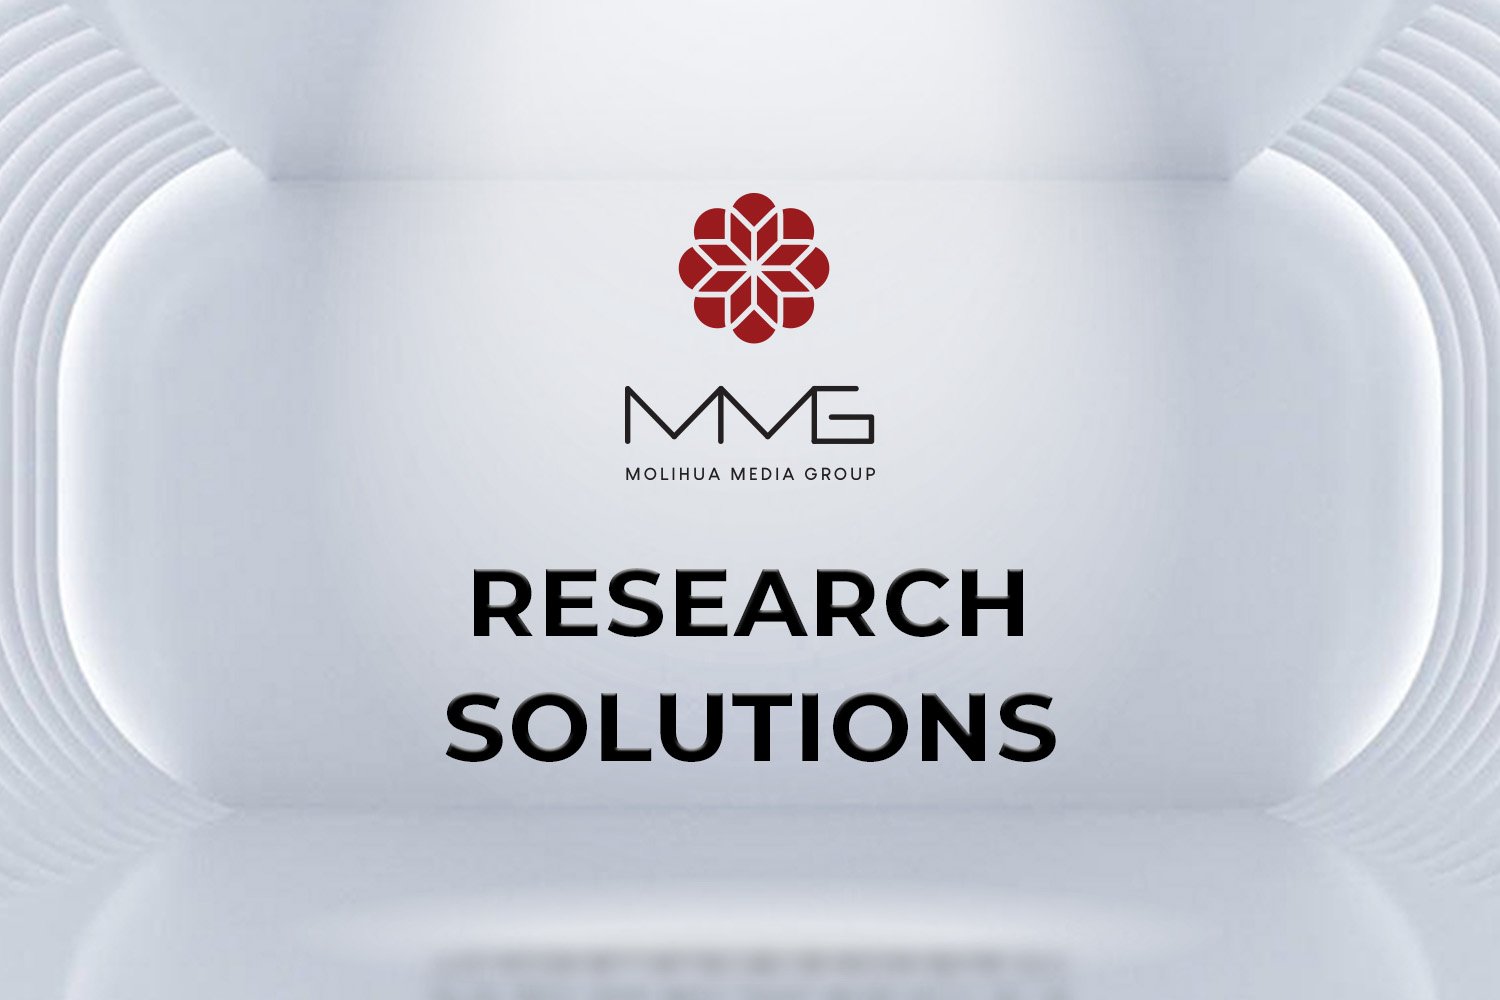 Research solutions